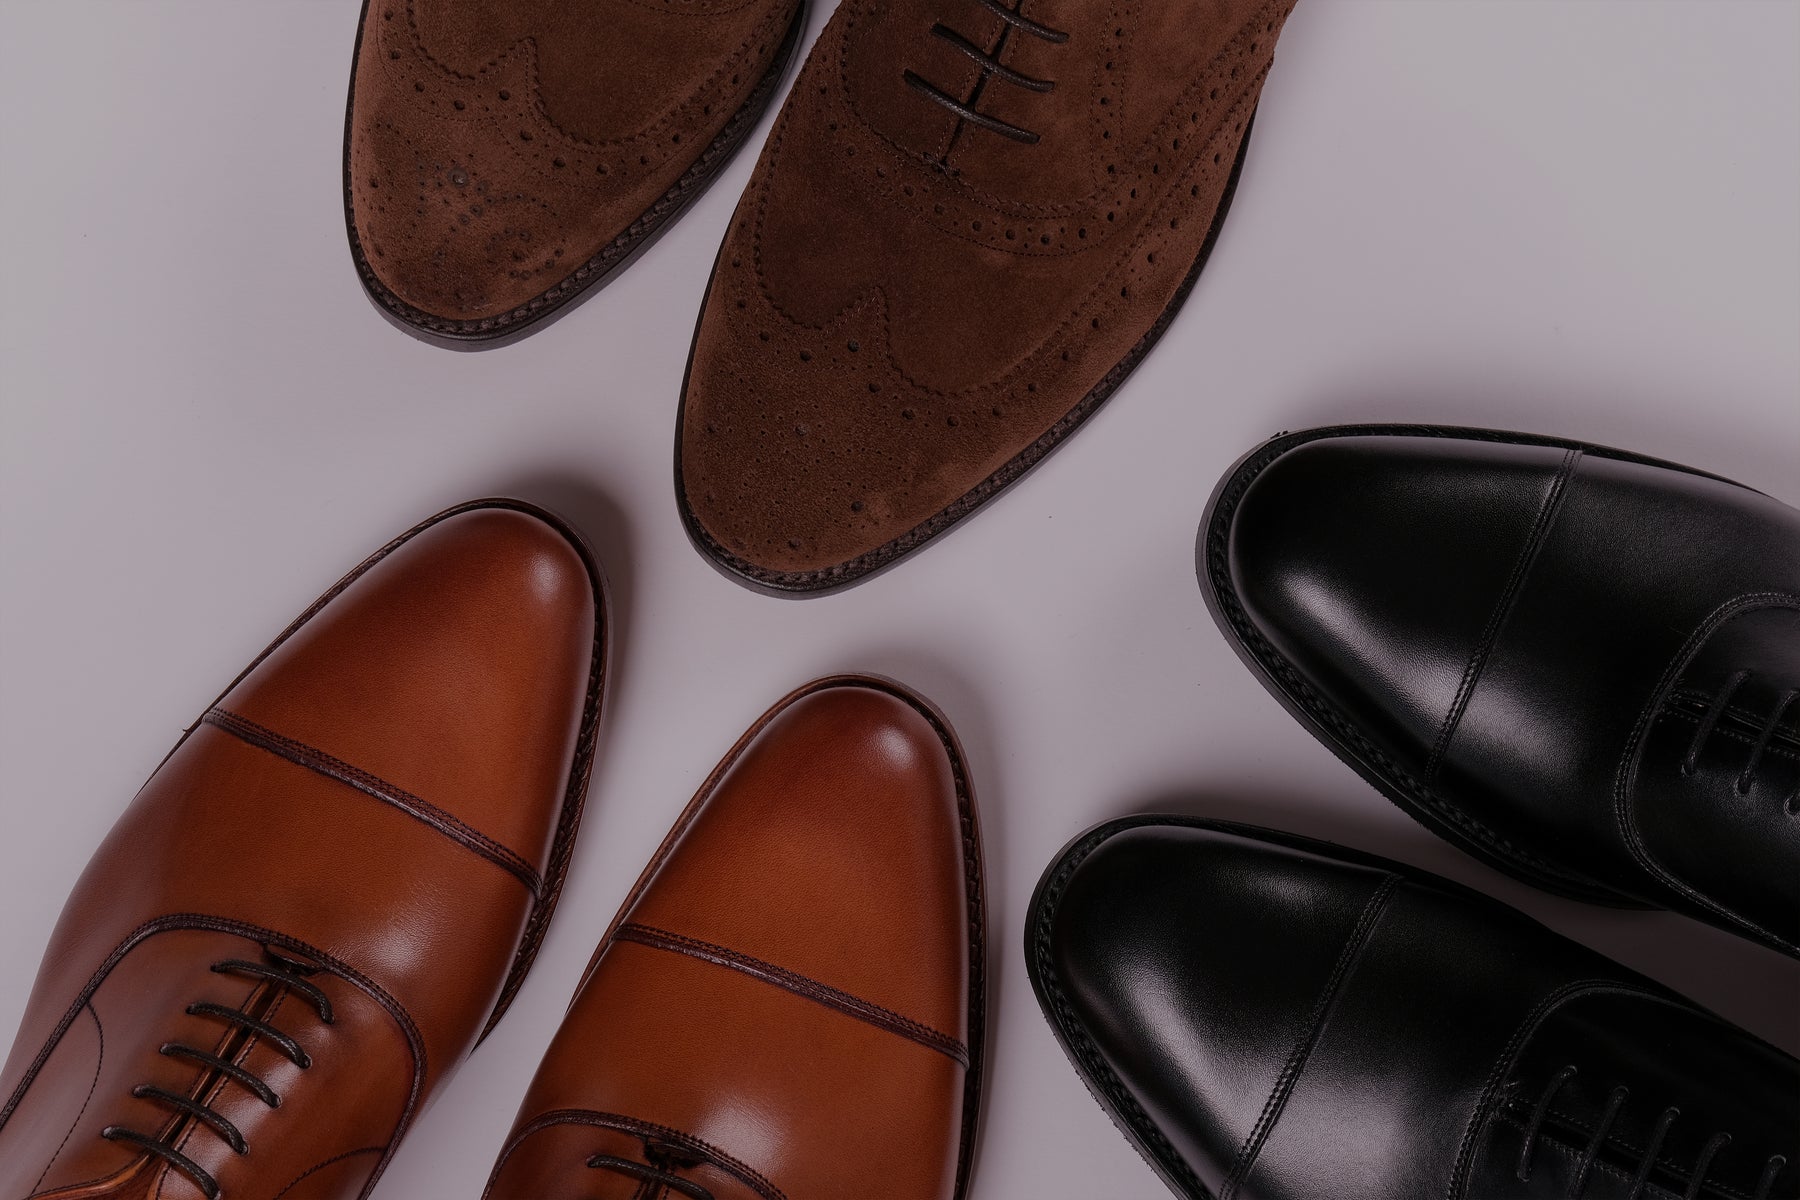 Black formal shoes for men for an impeccable style - Times of India